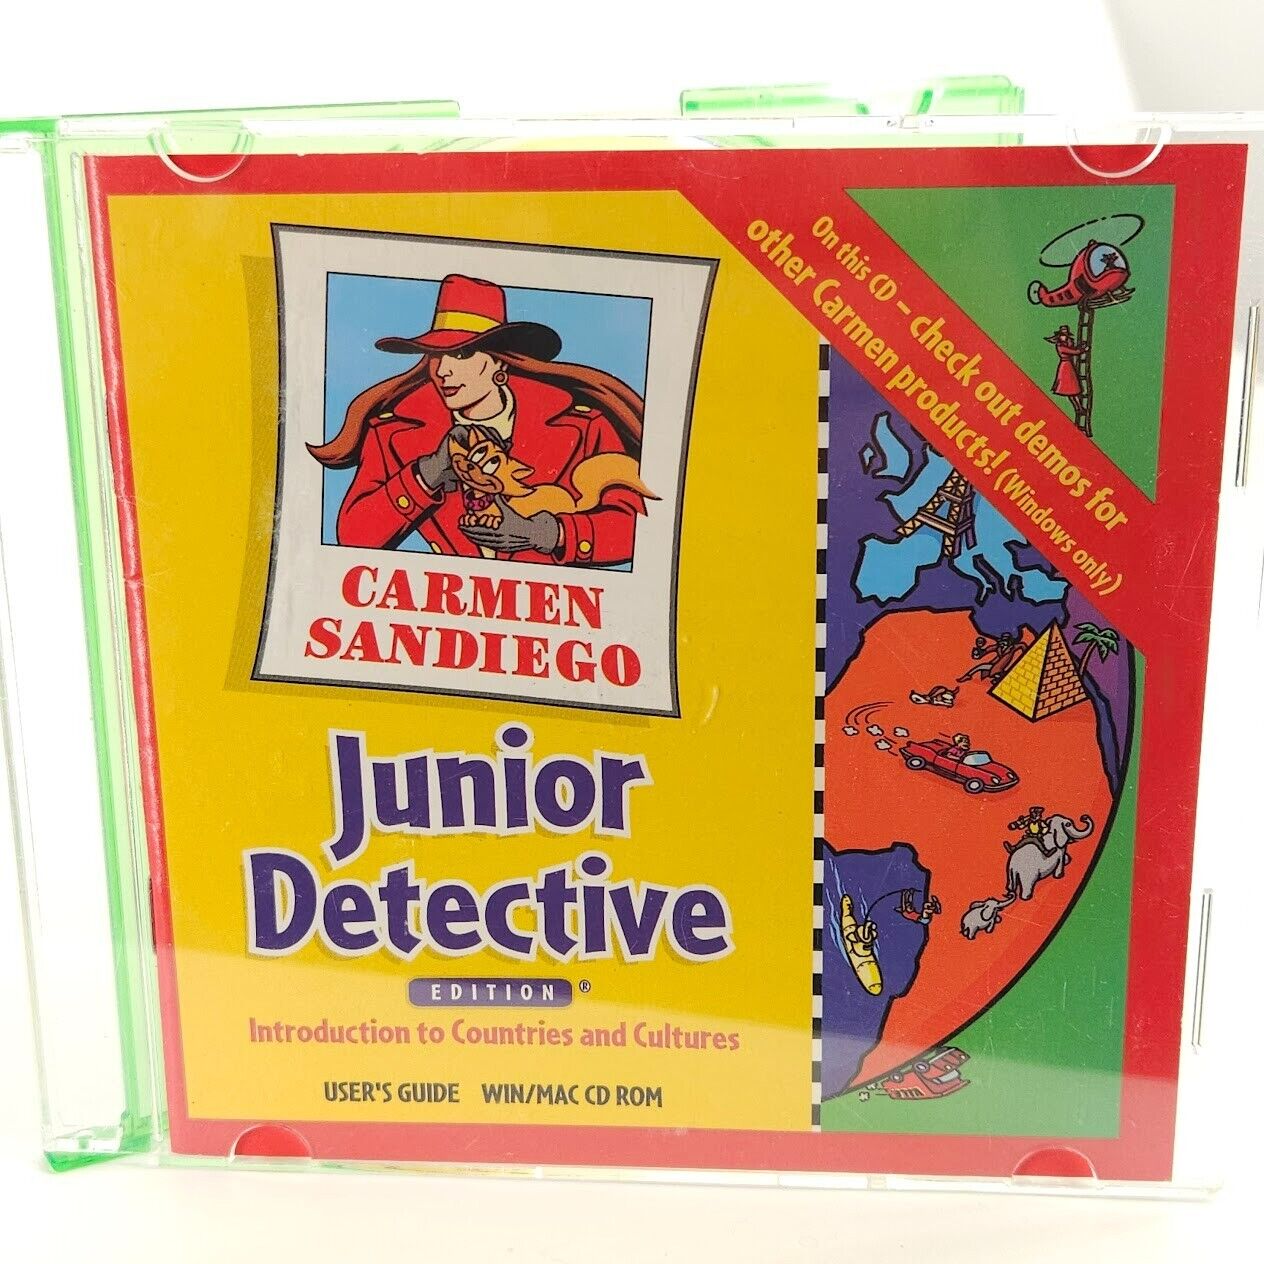 Carmen Sandiego Junior Detective Edition CD Introduction to Countries & Culture